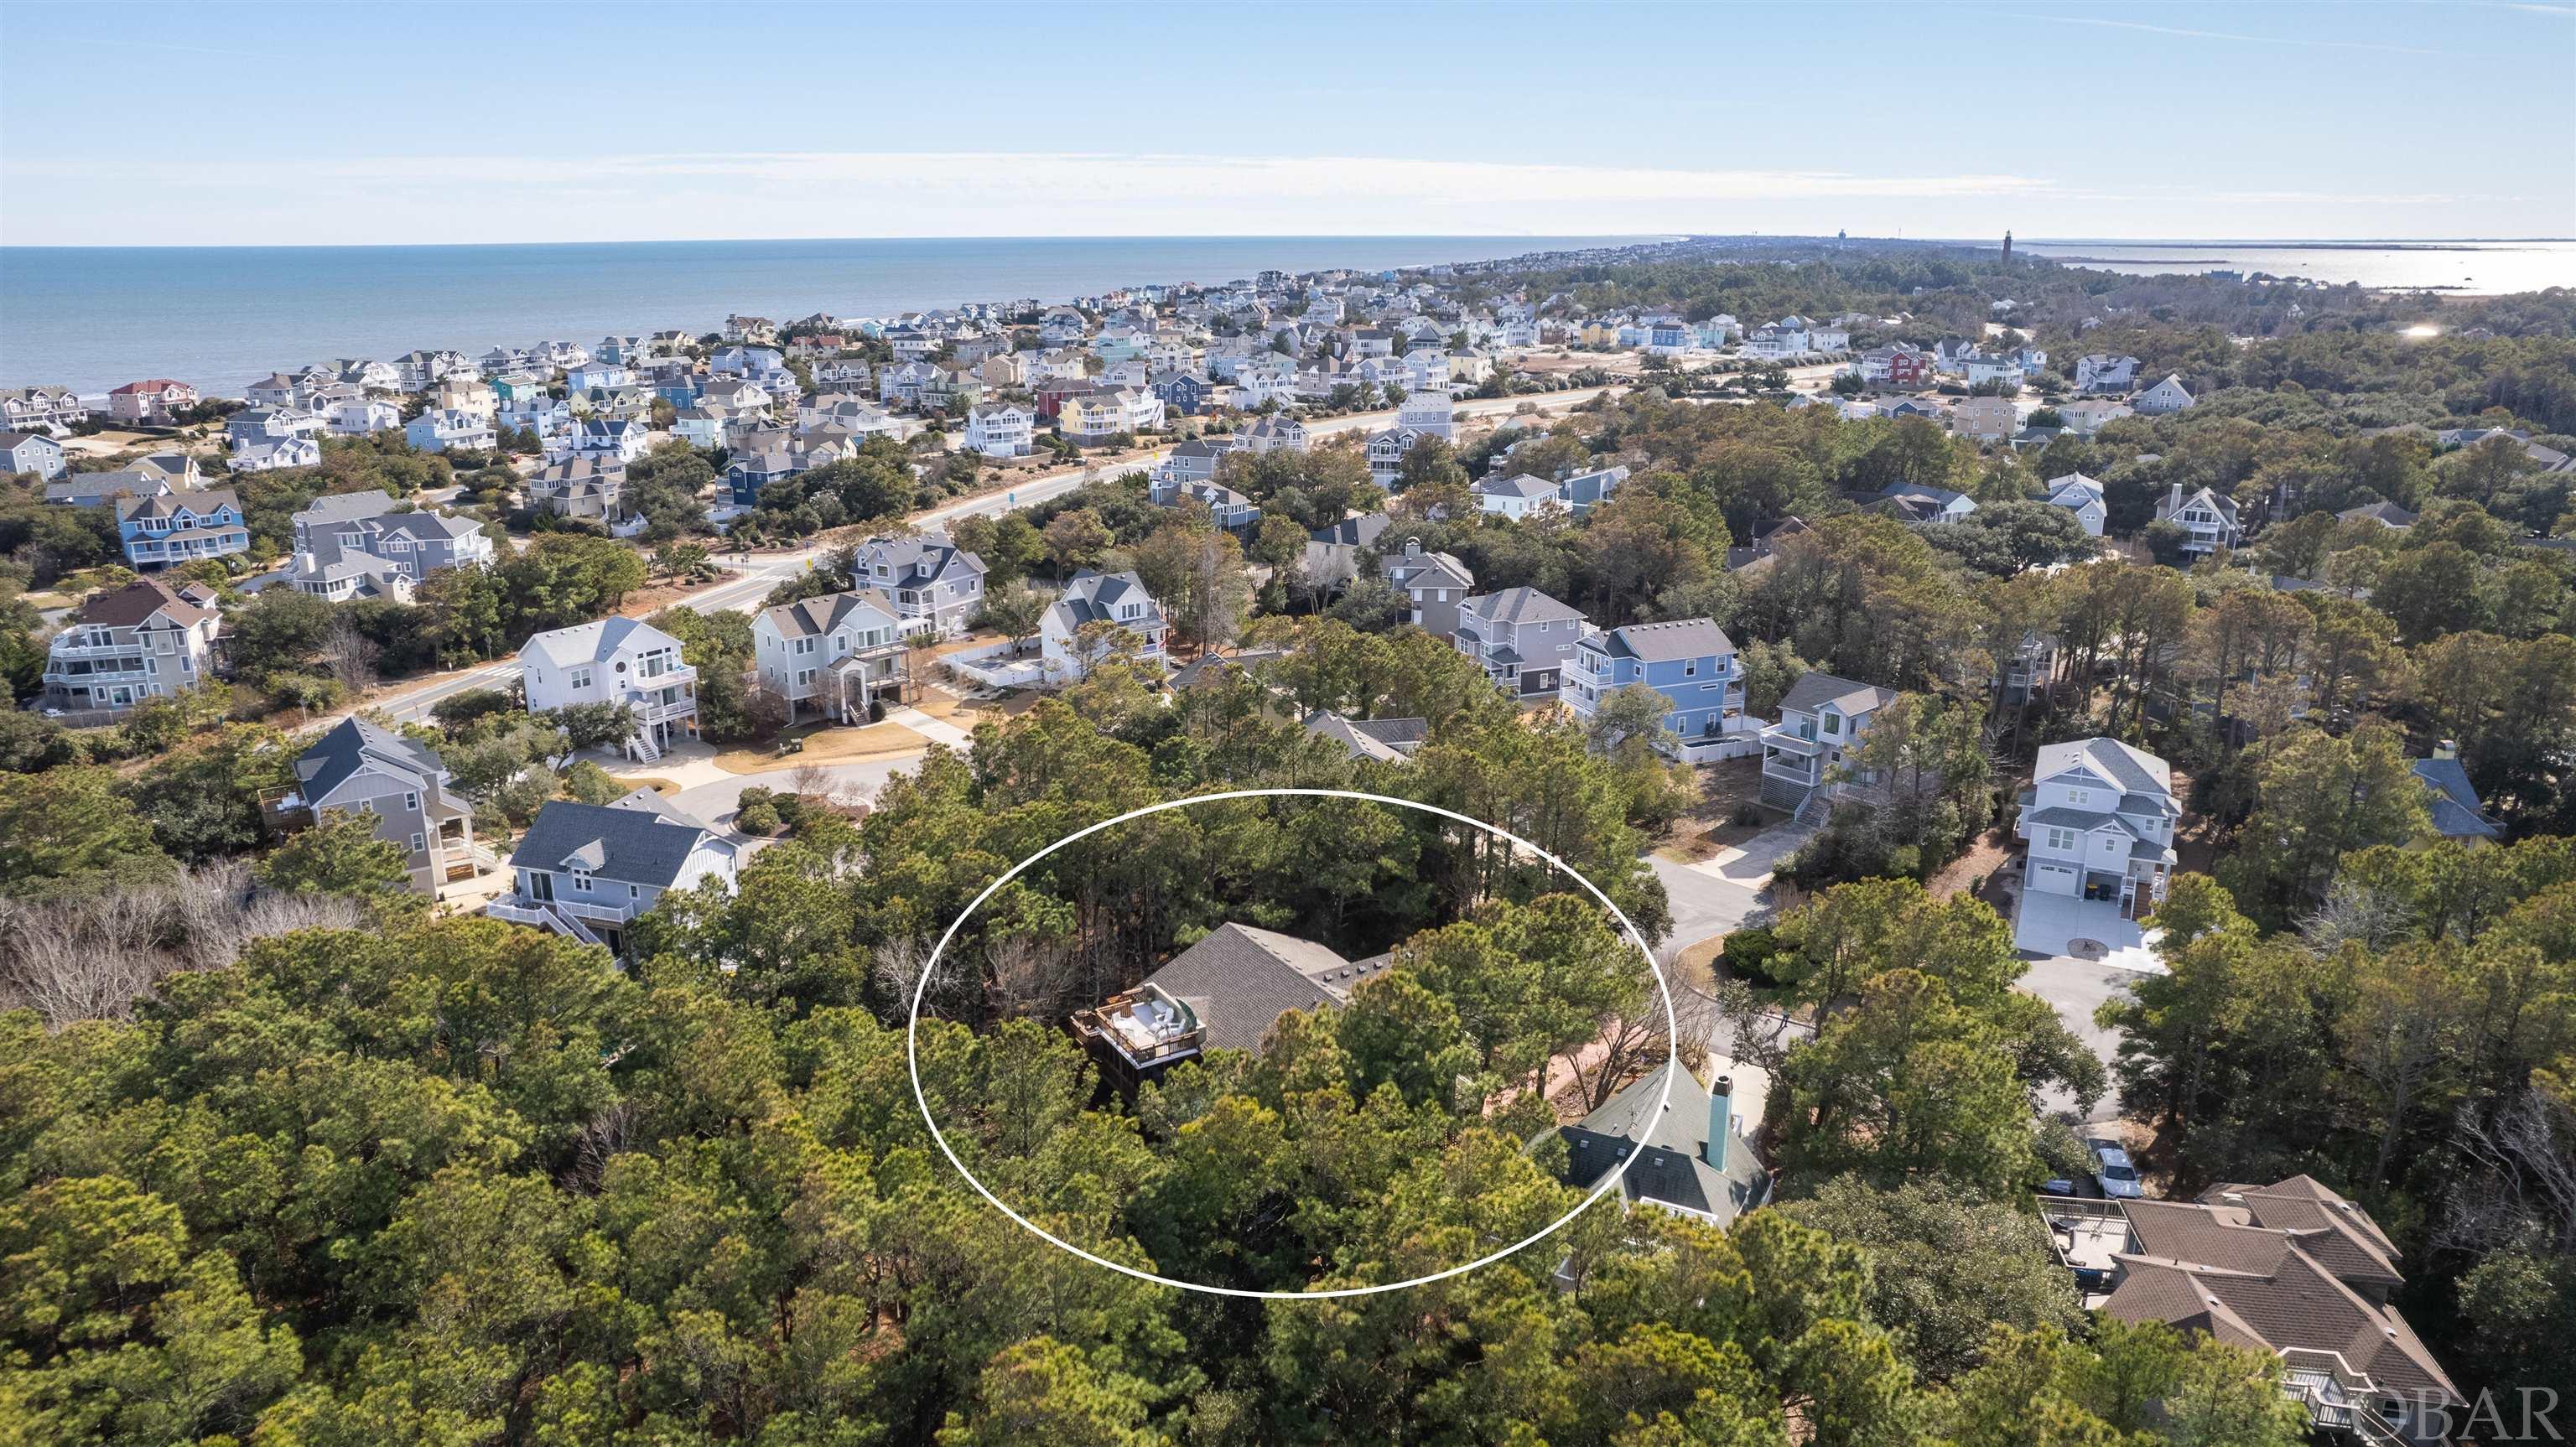 1277 North Lake Court, Corolla, NC 27927, 3 Bedrooms Bedrooms, ,4 BathroomsBathrooms,Residential,For sale,North Lake Court,124422